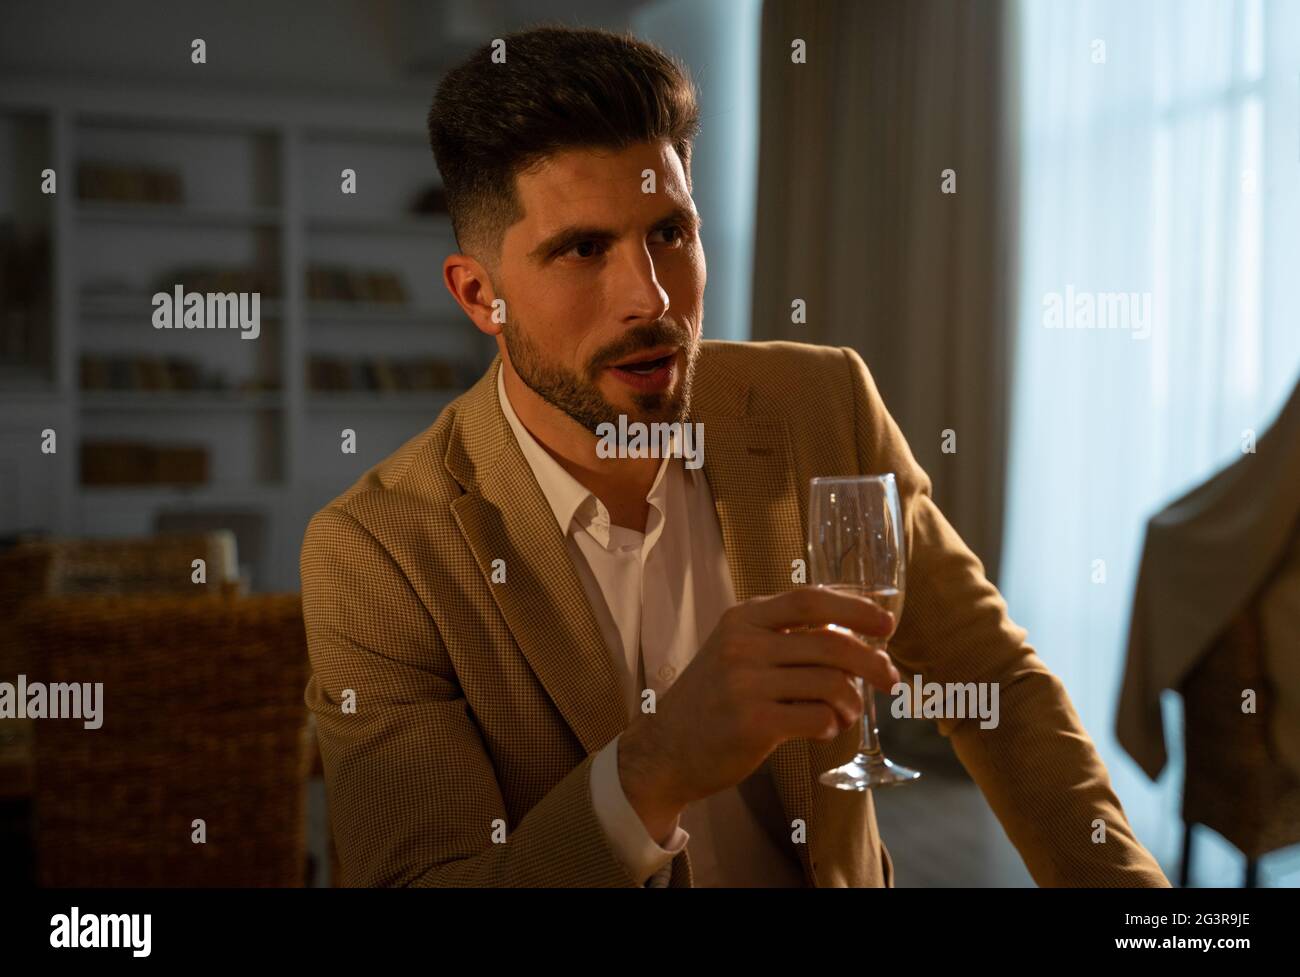 Handsome young man in formal festive suit raising his glass of champagne while making a toast in stylish living room at holiday dinner in evening, wishing happy birthday. Celebration concept Stock Photo